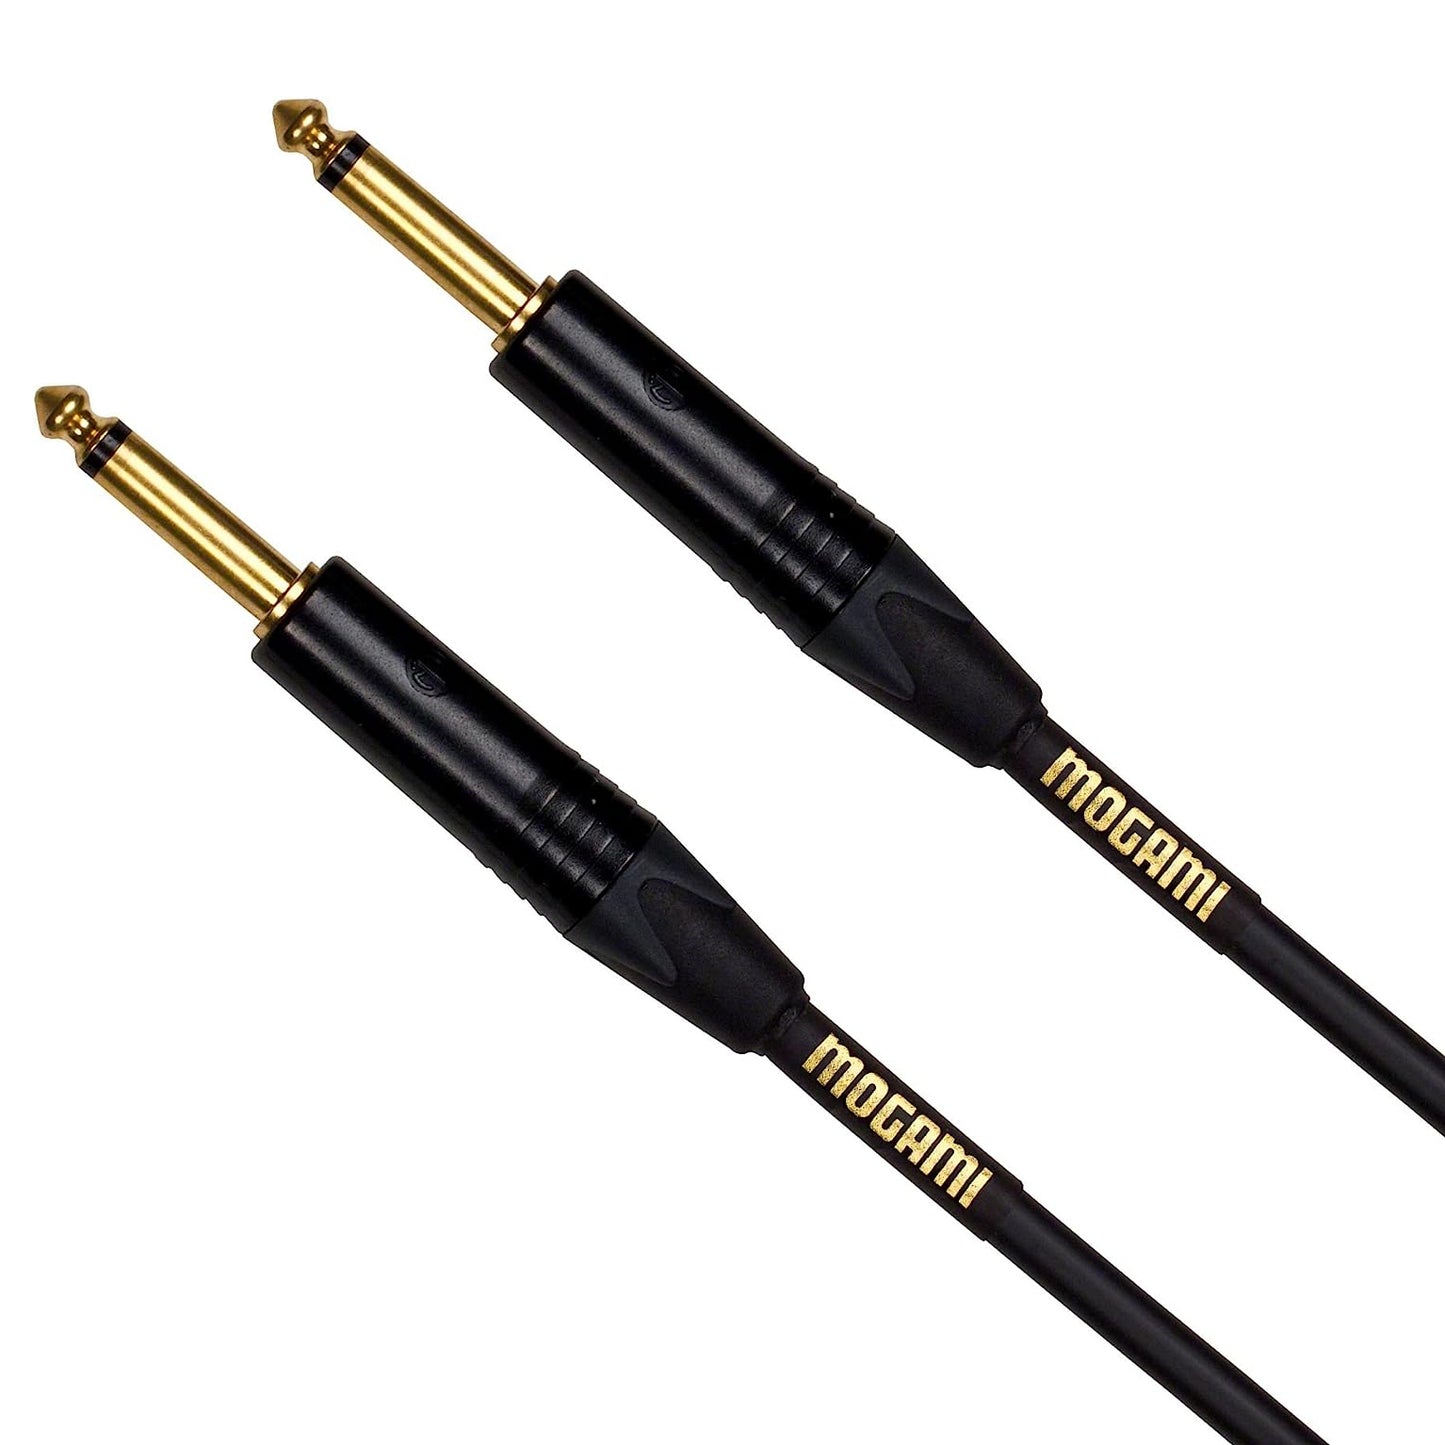 Mogami Gold INSTRUMENT-06 Guitar Instrument Cable, 6 Foot